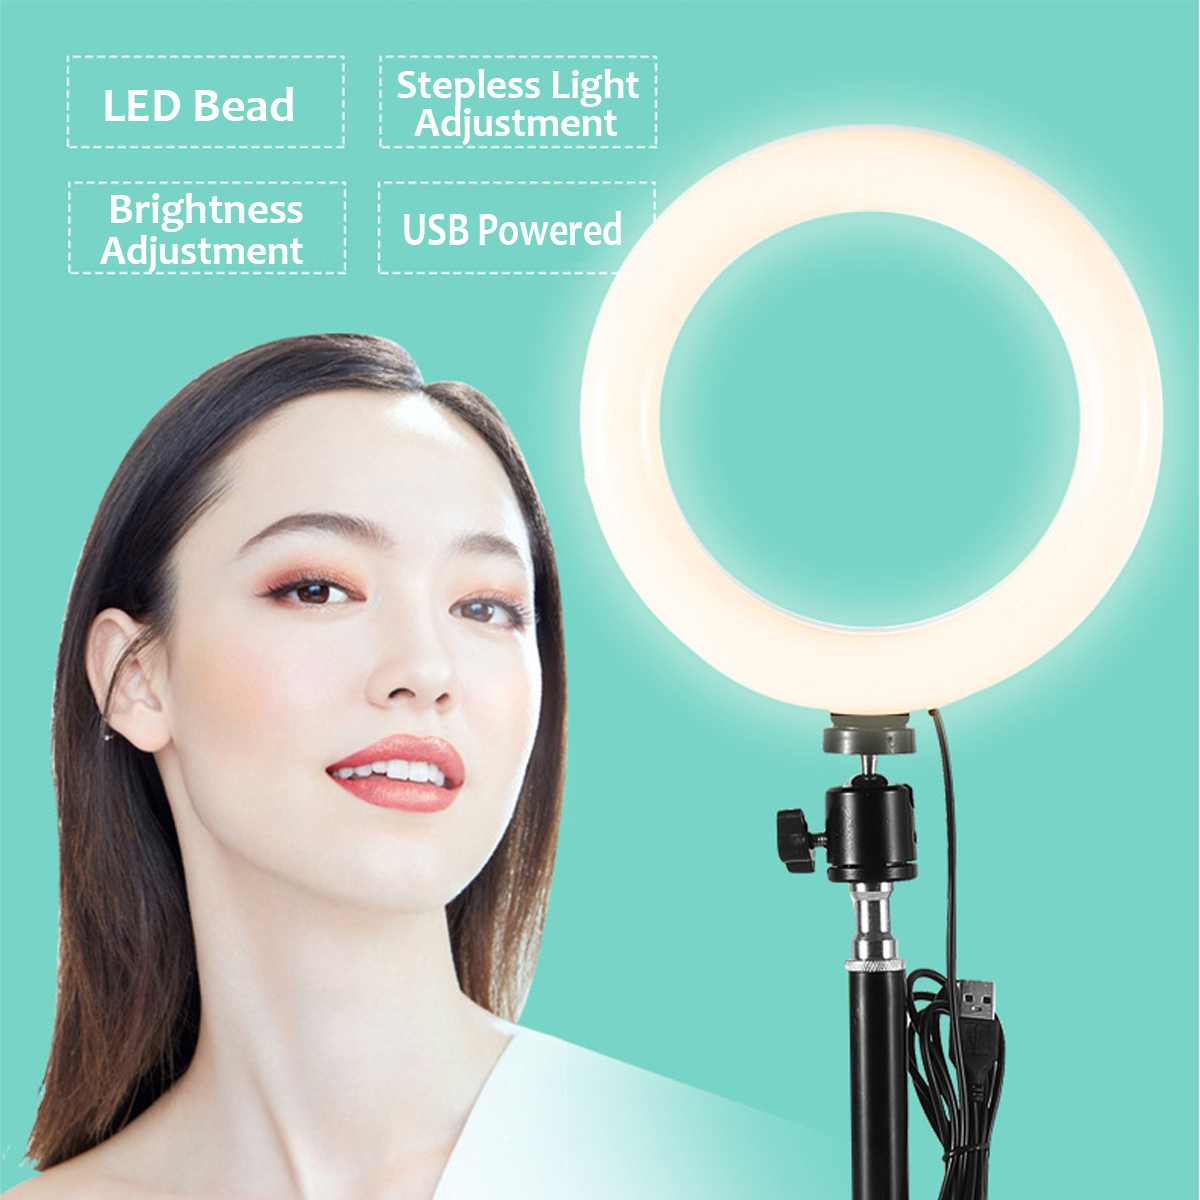 Dimmable-LED-Ring-Light-Lamp-18CM-26CM-Fill-Light-for-Makeup-Live-Stream-Selfie-Photography-Video-Re-1680025-3